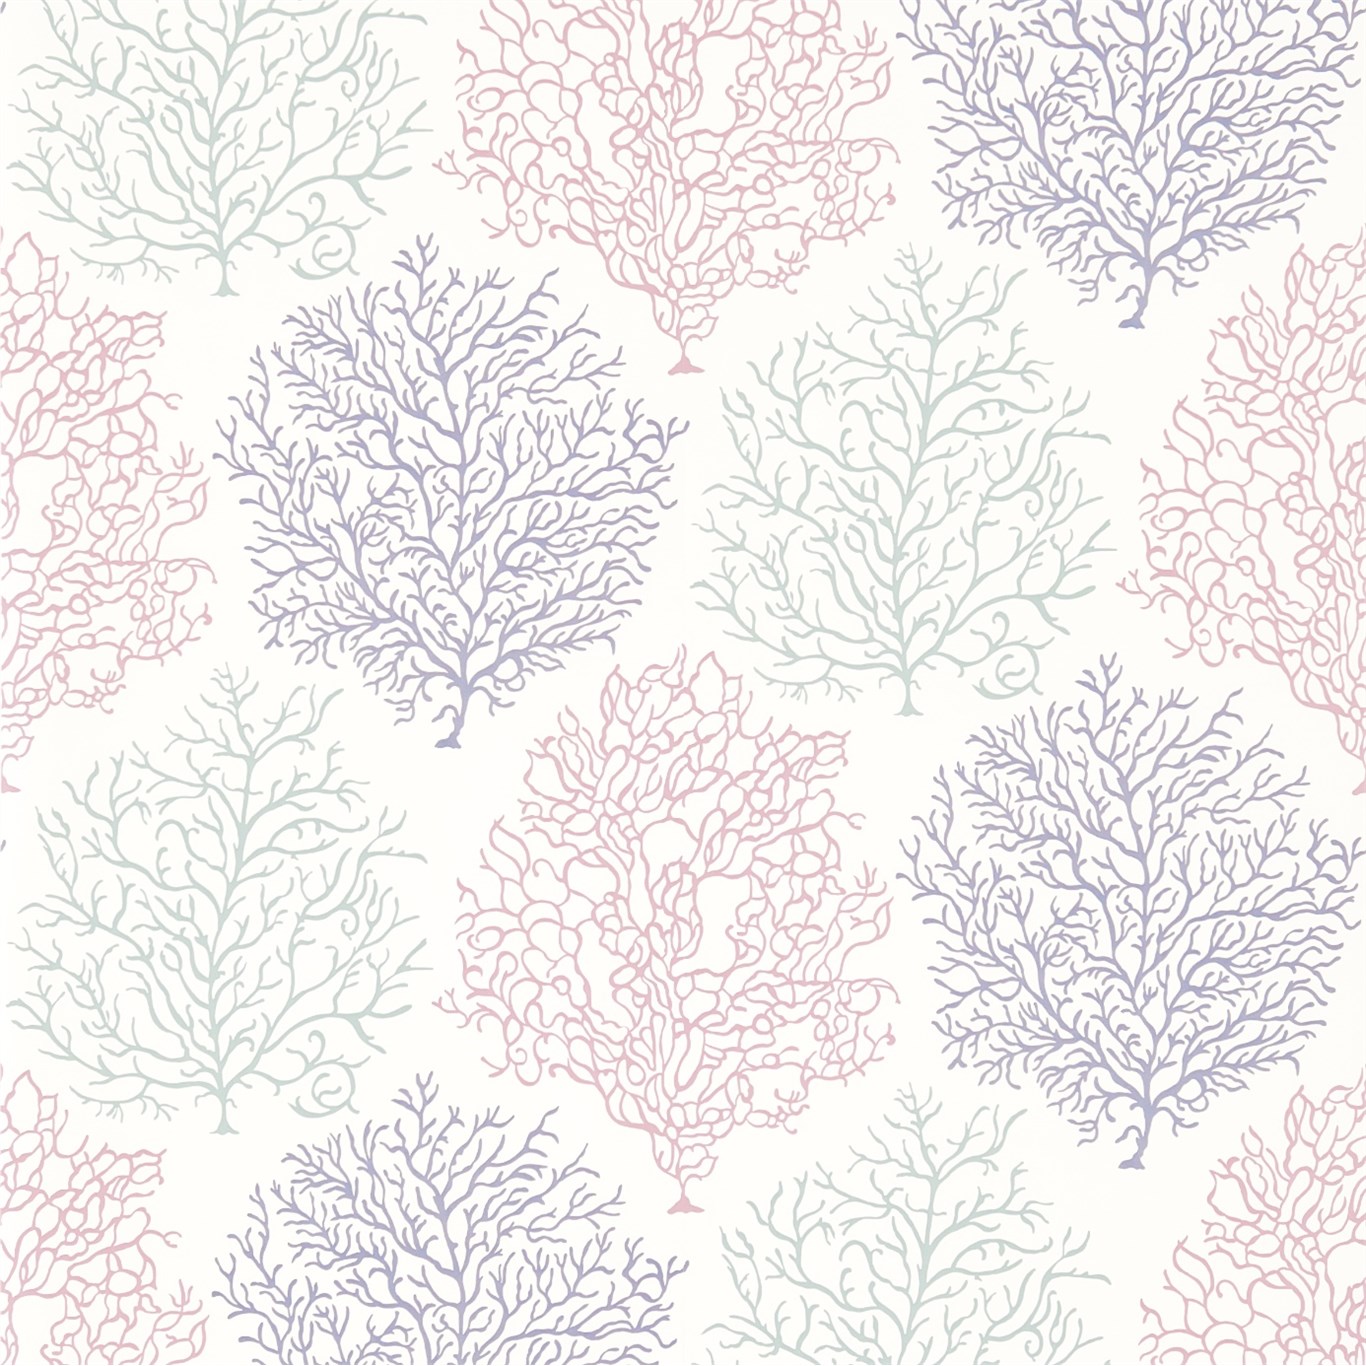 Wallpaper - Sanderson Voyage of Discovery Coral Reef Teal/Mauve